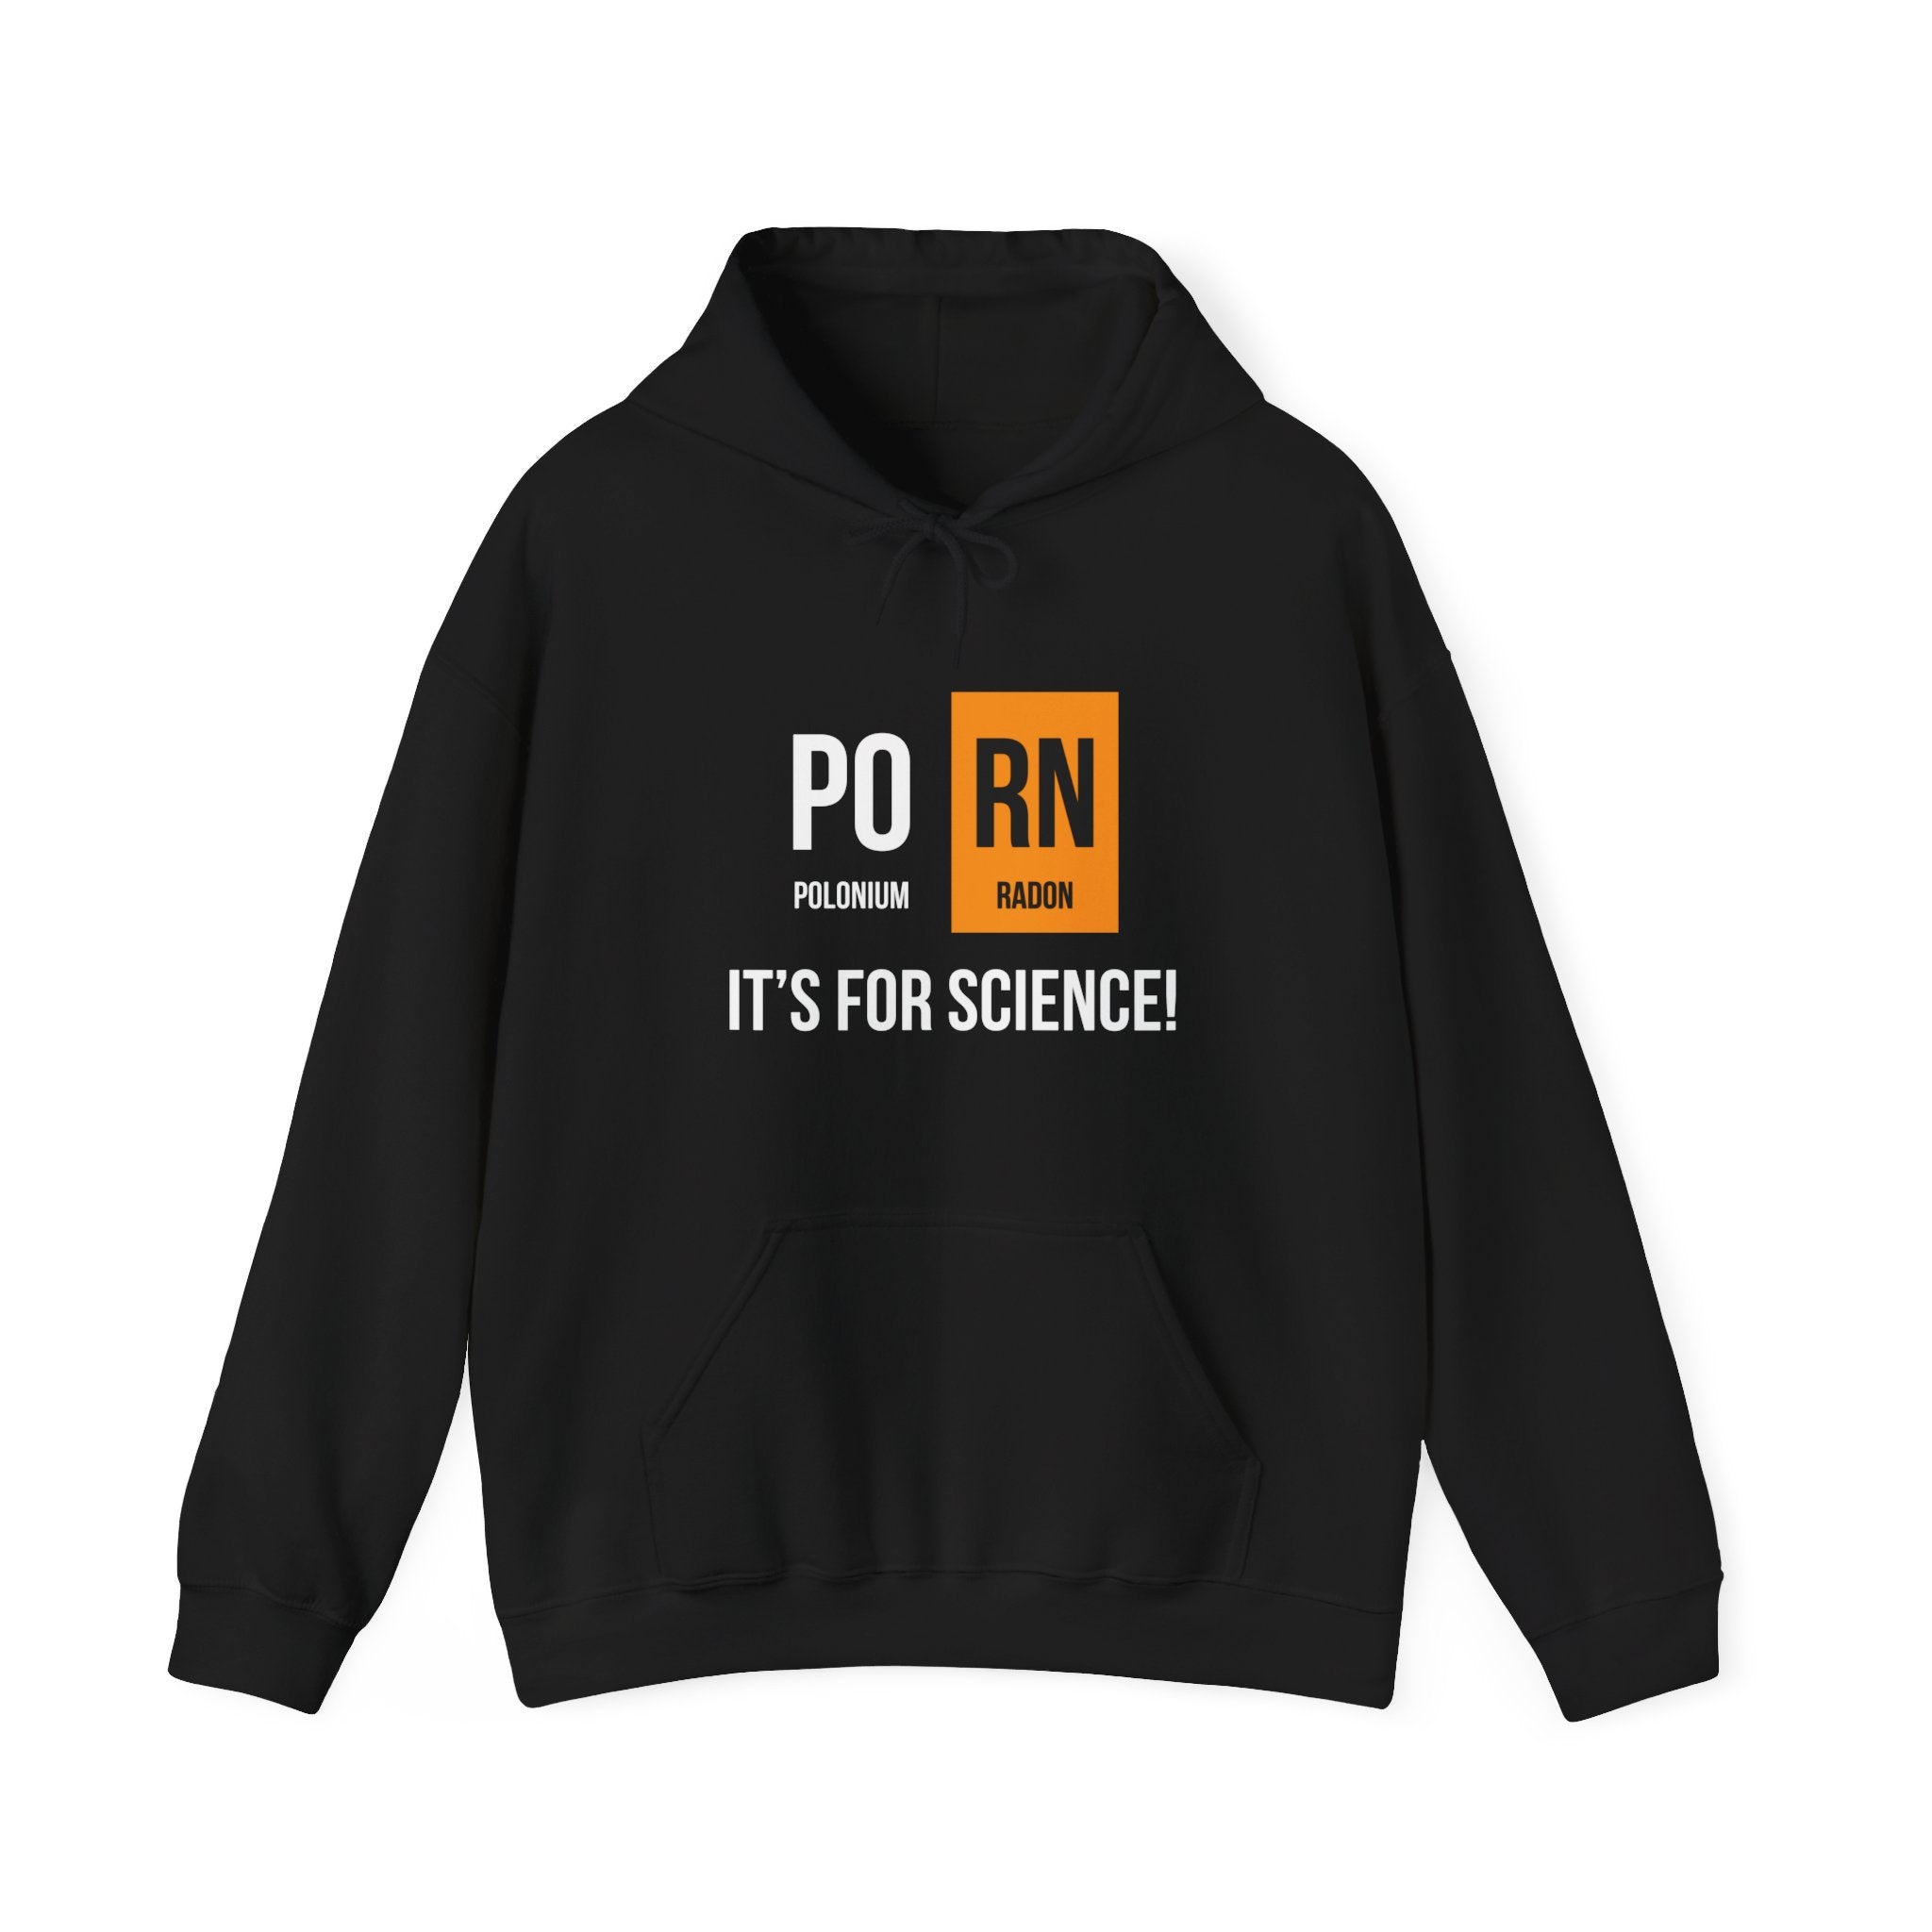 Black 100% cotton PO-RN - Hooded Sweatshirt featuring "PO" (Polonium) and "RN" (Radon) on periodic table squares, along with the phrase "IT'S FOR SCIENCE!" in bold white and orange text, exuding an edgy charm.